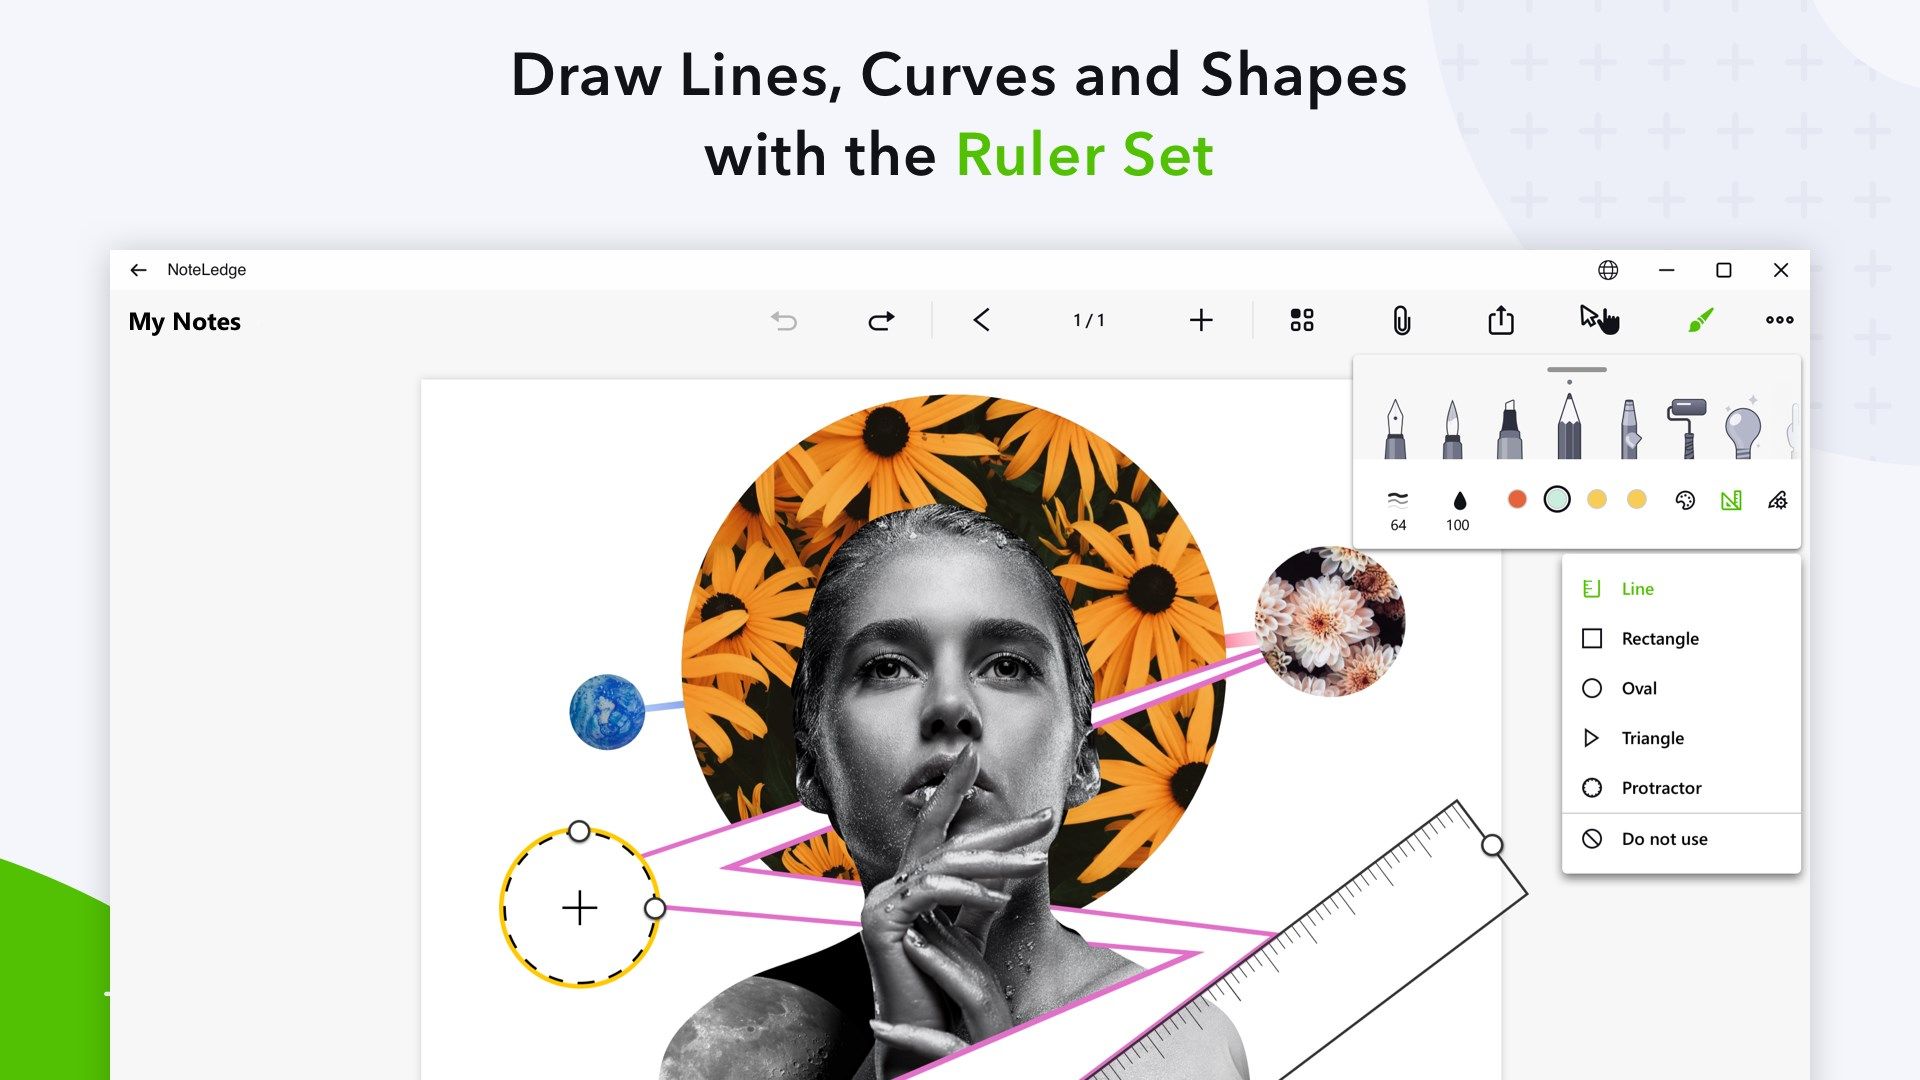 Draw Lines, Curves and Shapes with the Ruler Set